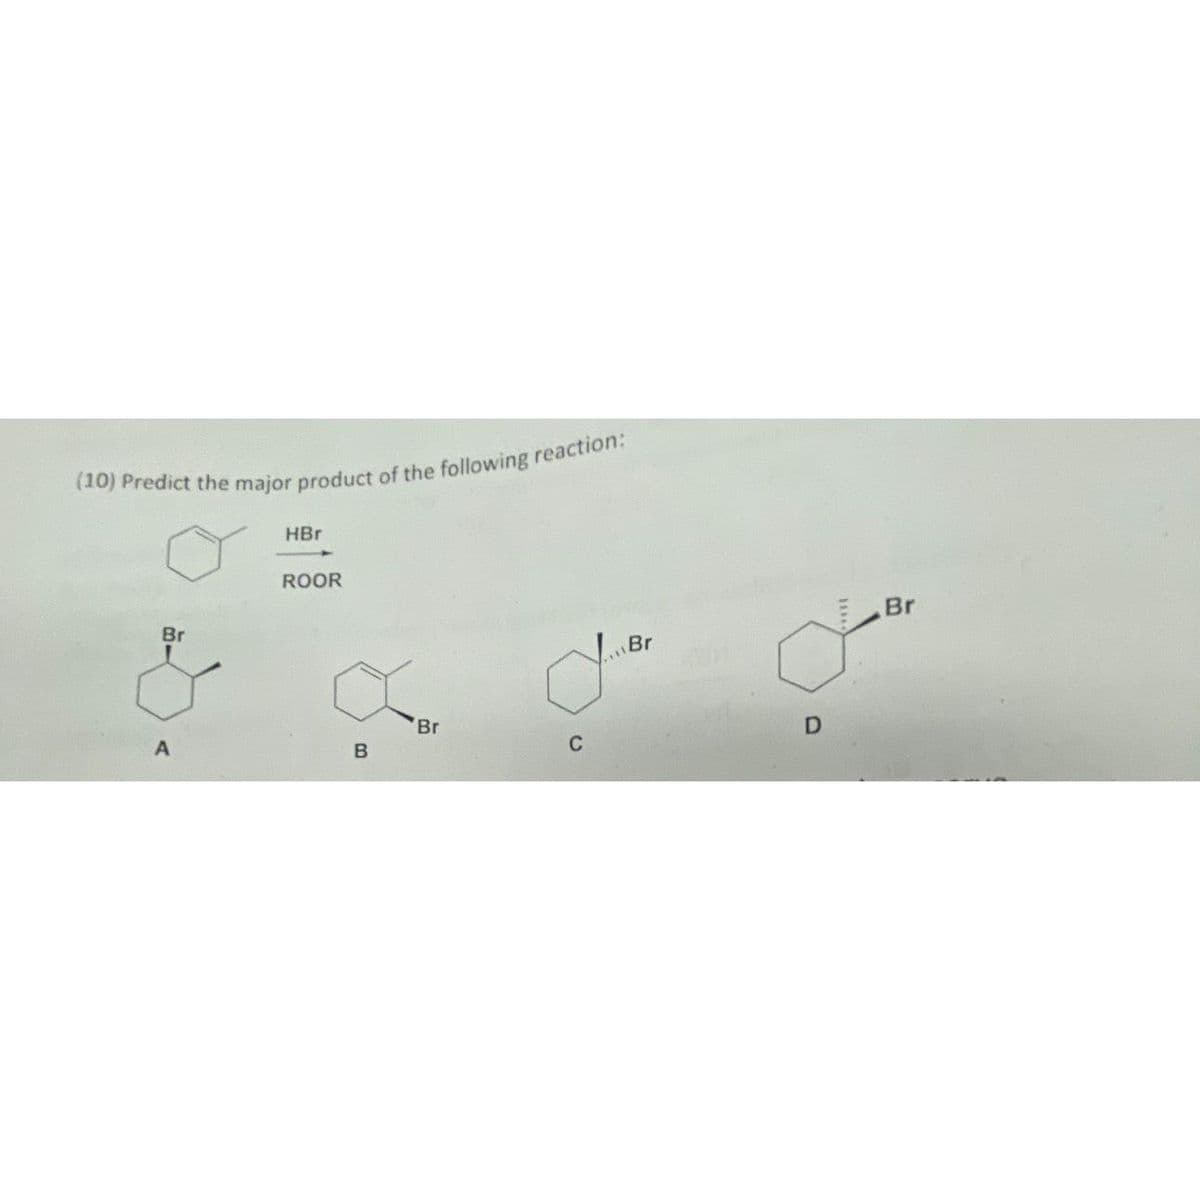 (10) Predict the major product of the following reaction:
Br
A
HBr
ROOR
B
'Br
Br
a
C
11*
Br
L™